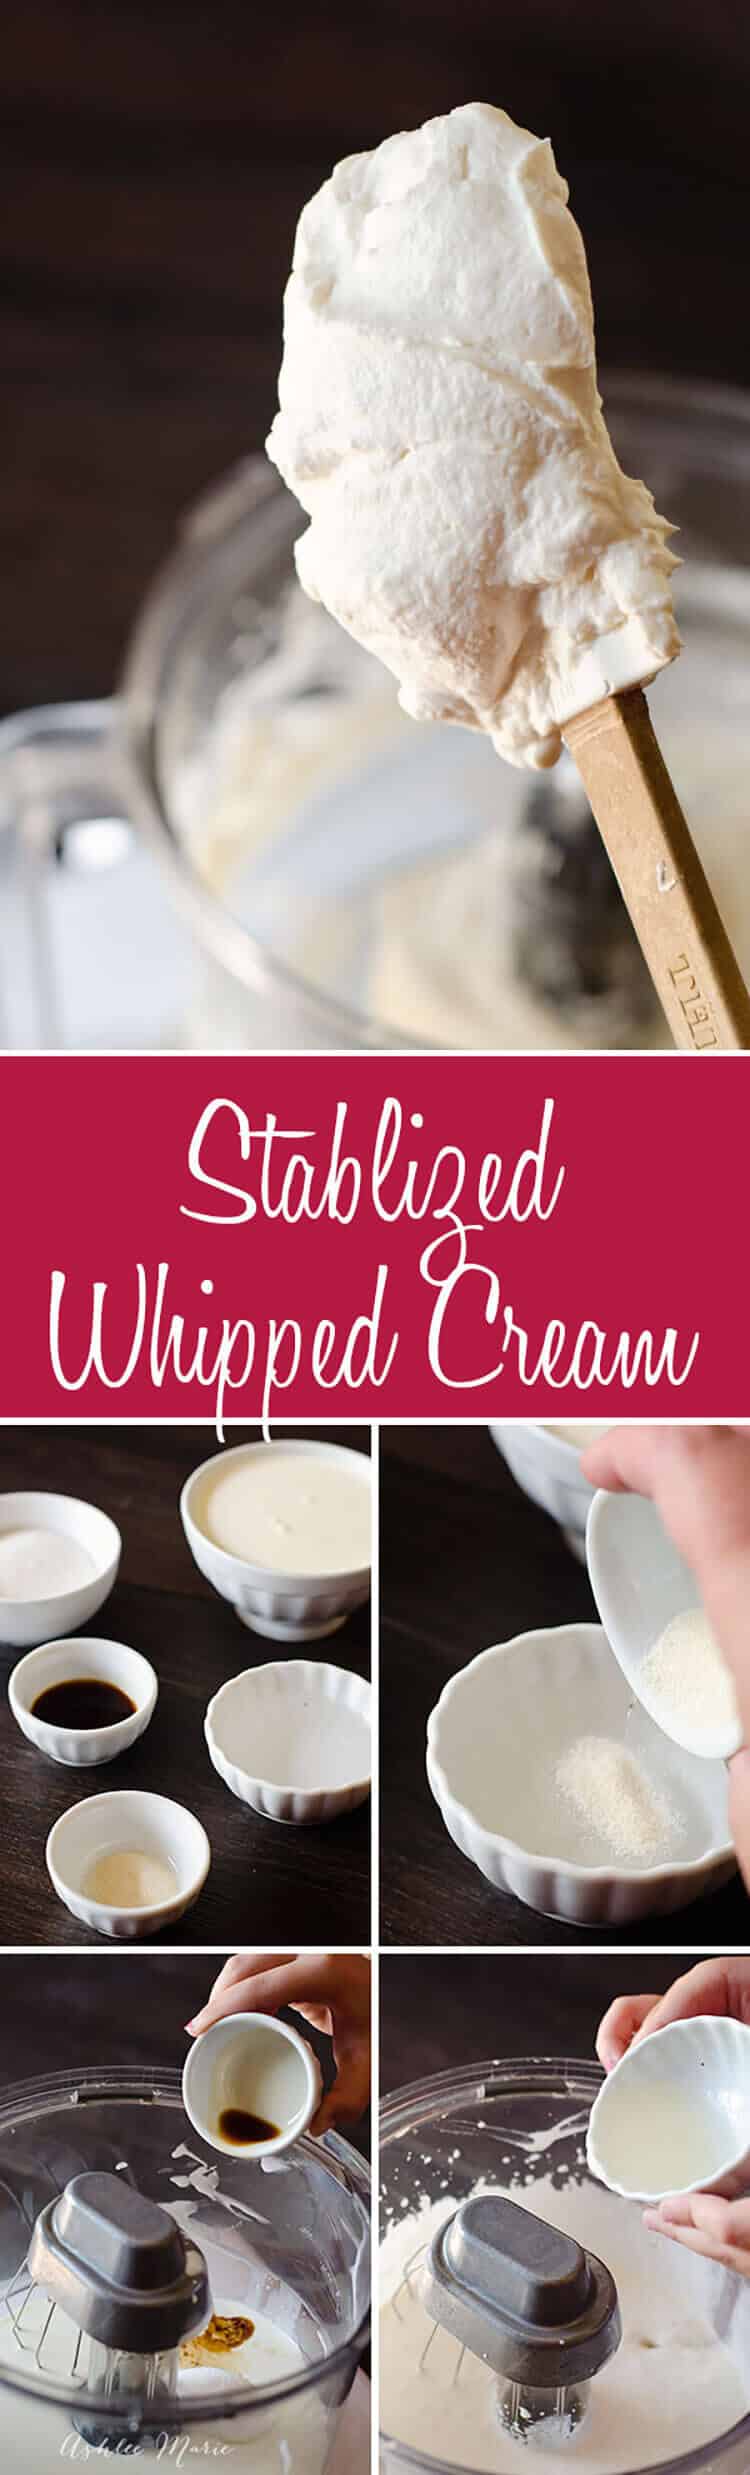 When you need your whipped cream to stay whipped you want to stabilize it, now you can pipe it onto desserts and it will hold its shape